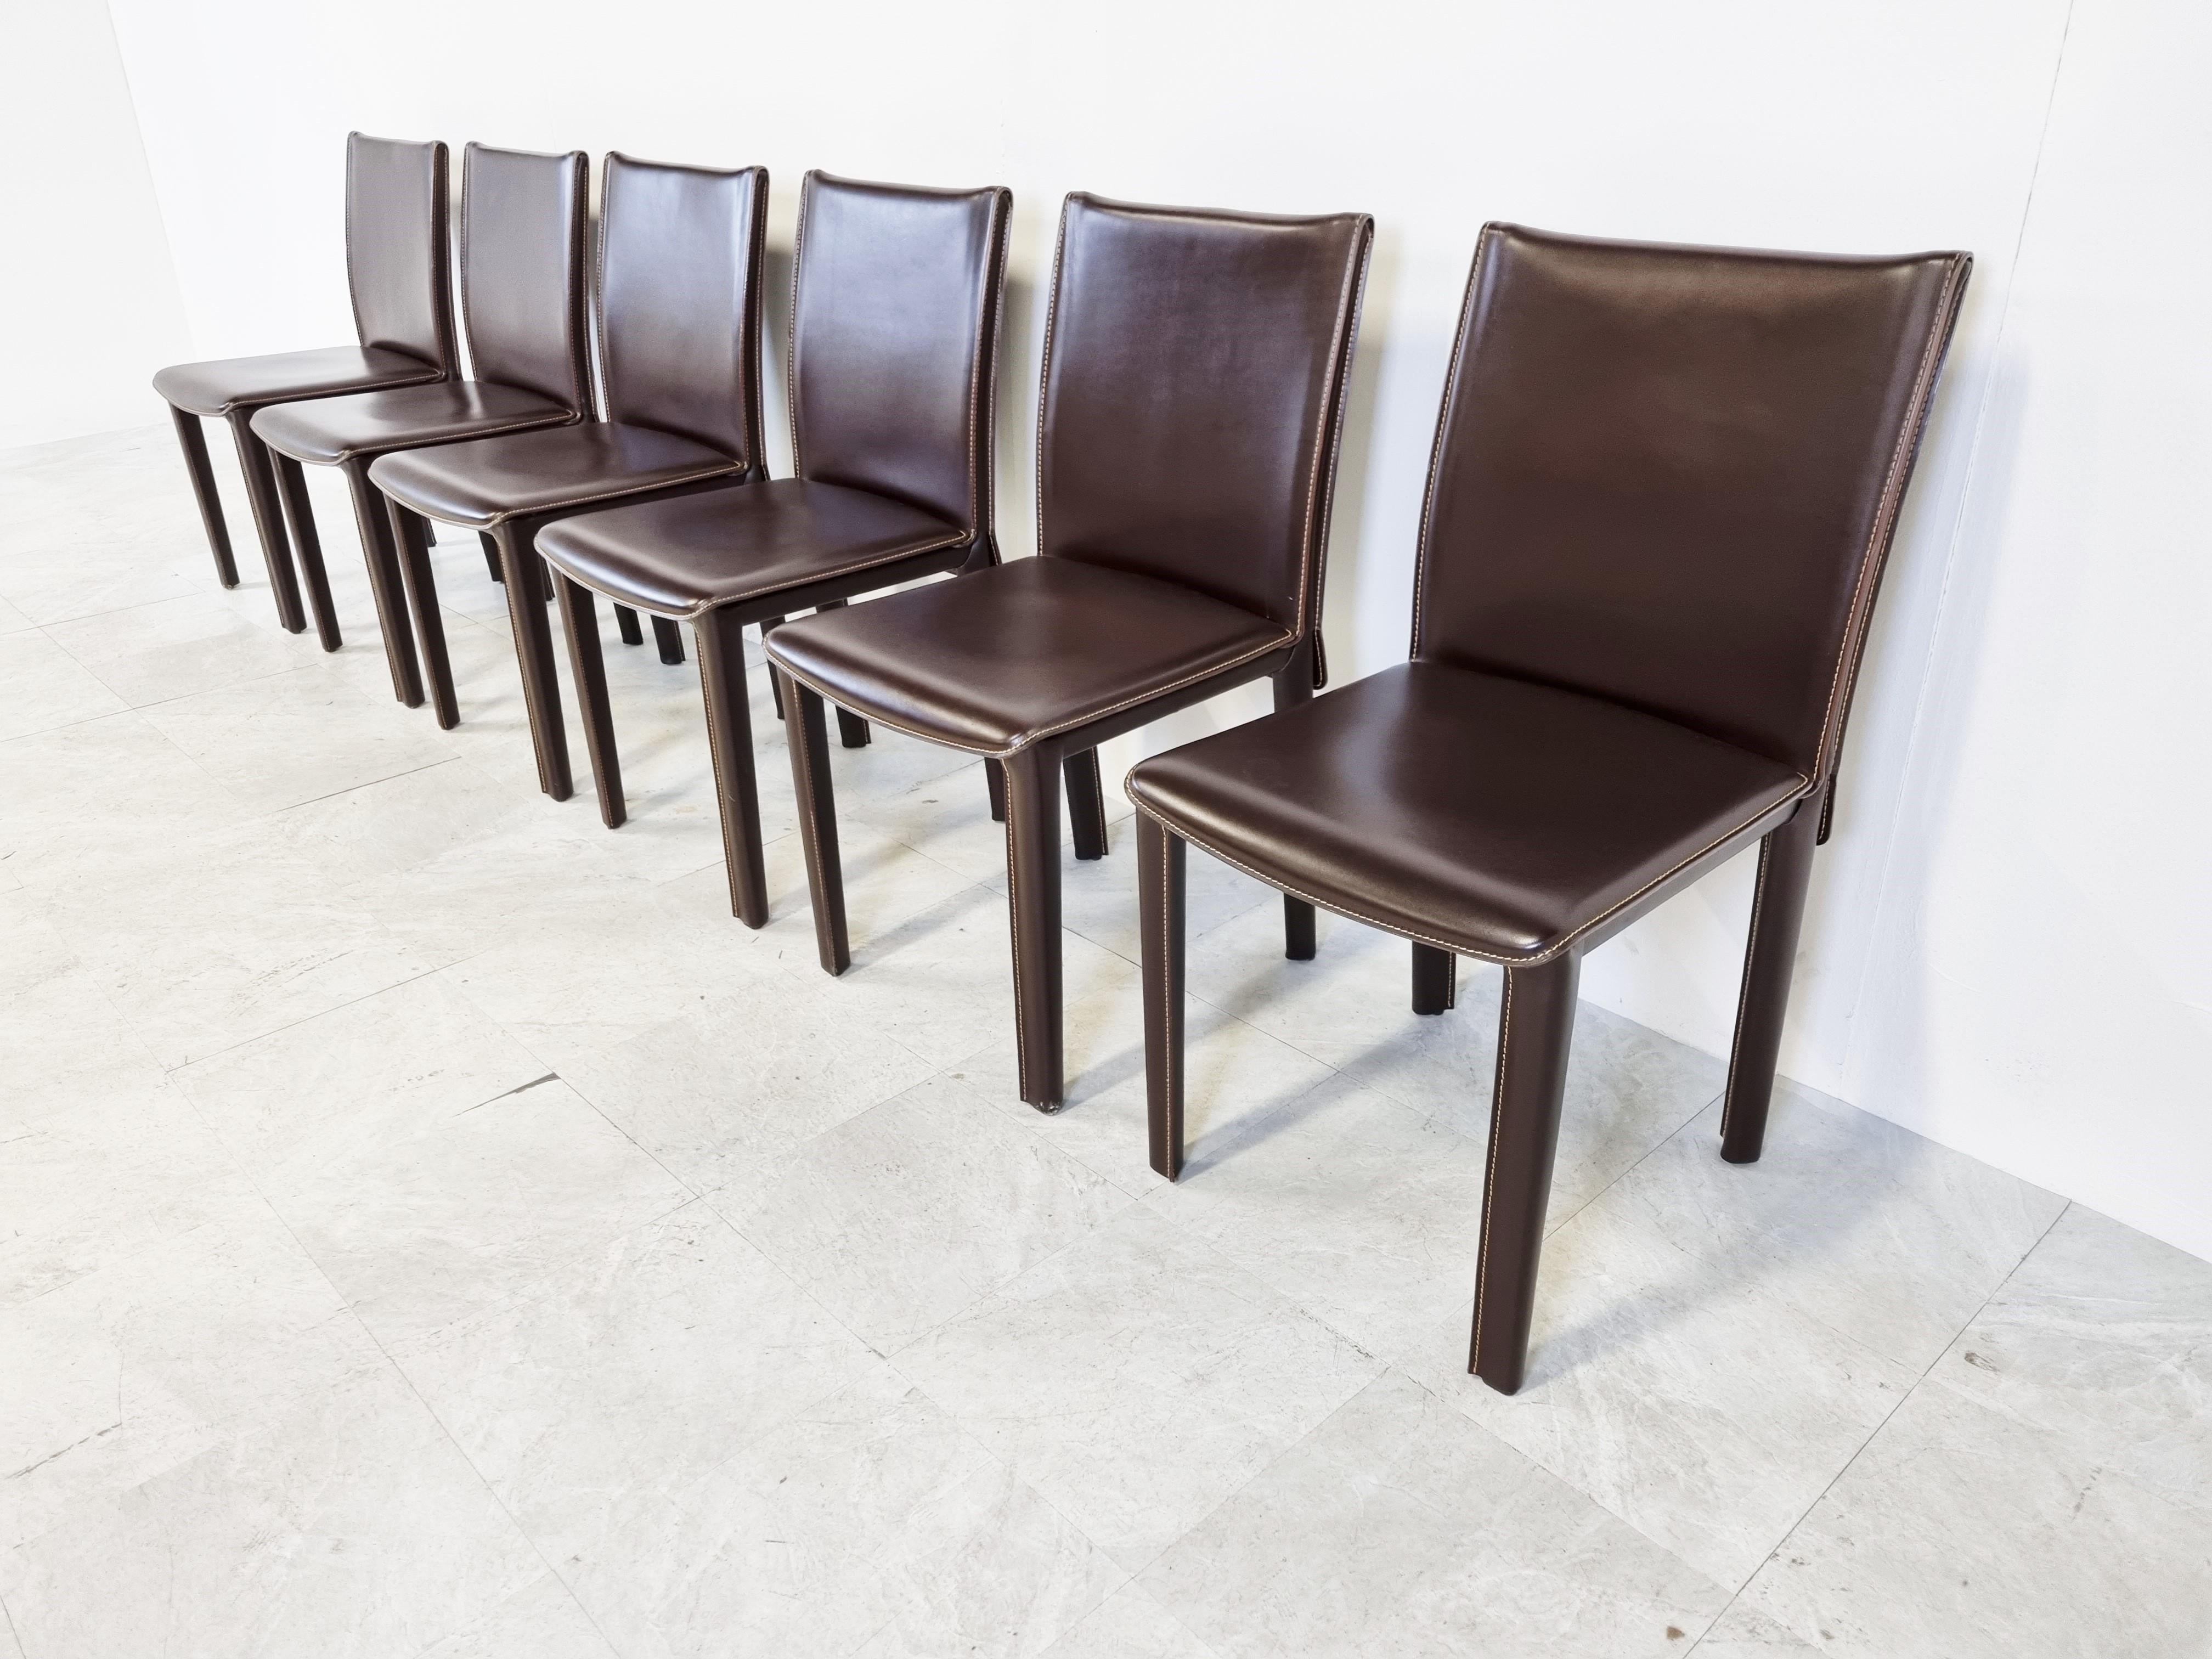 Late 20th Century Vintage Brown Leather Dining Chairs by Arper Italy, 1980s